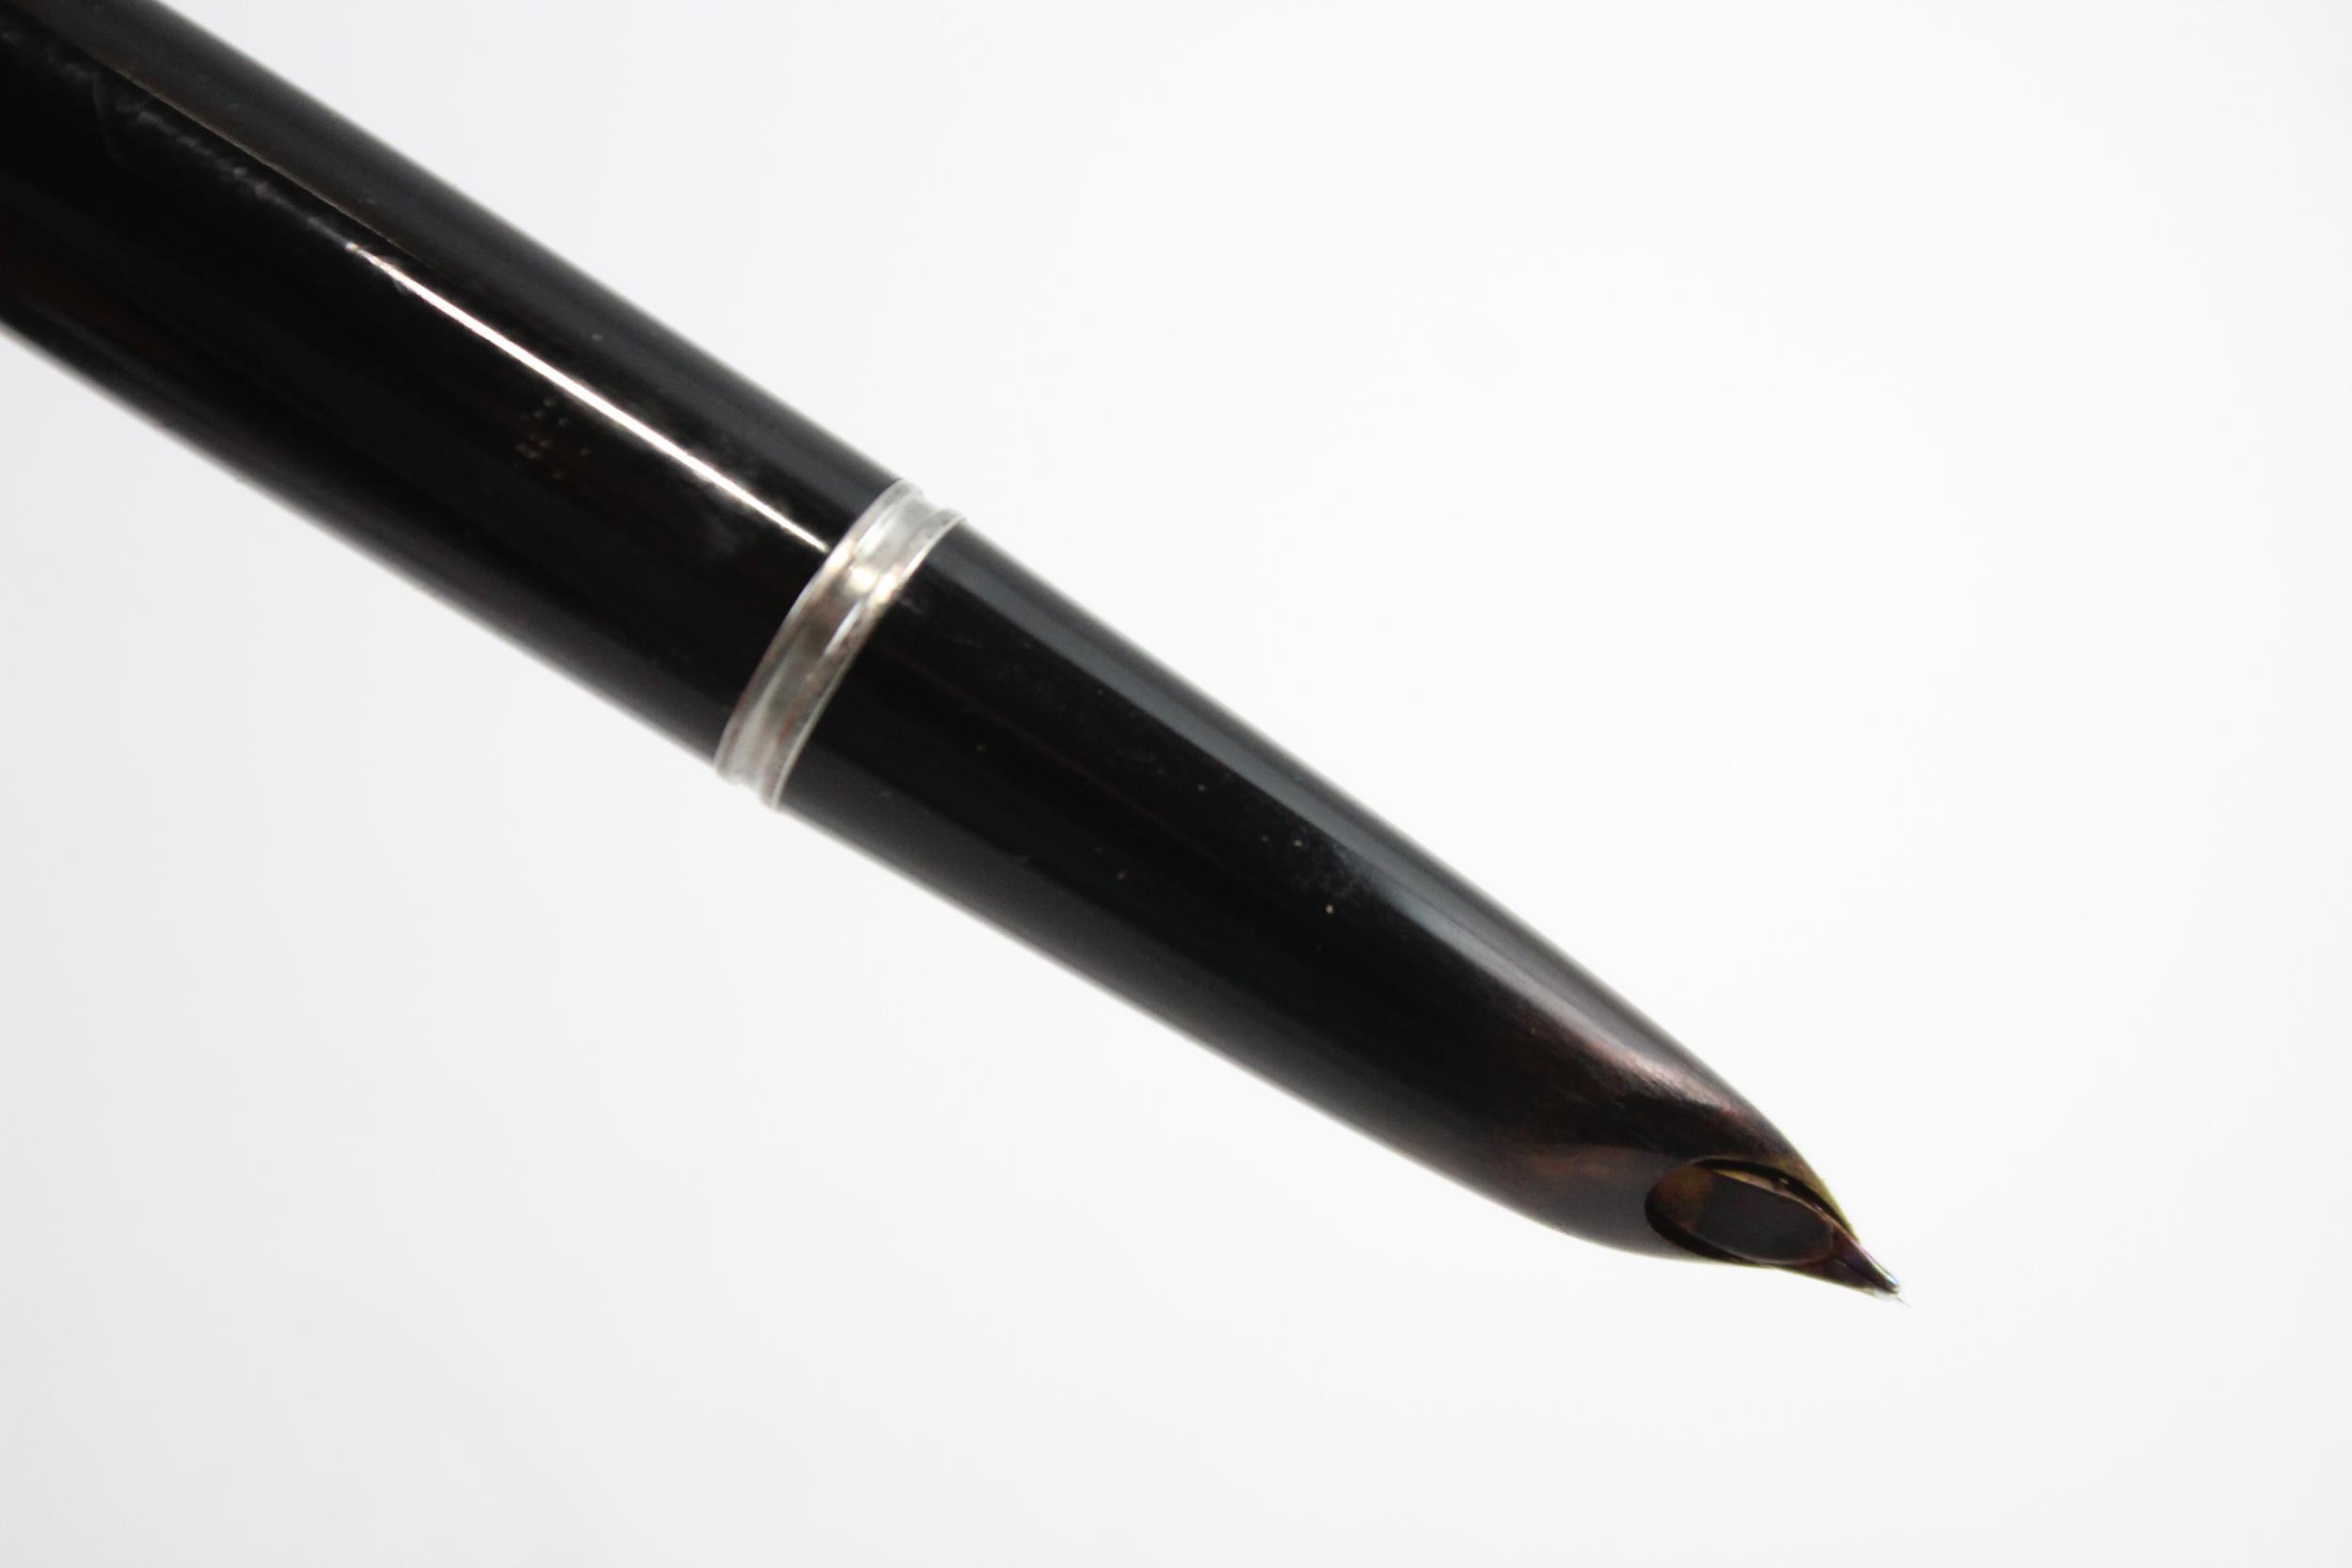 Vintage PARKER 51 Black FOUNTAIN PEN w/ Brushed Steel Cap WRITING // Dip Tested & WRITING In vintage - Image 4 of 9